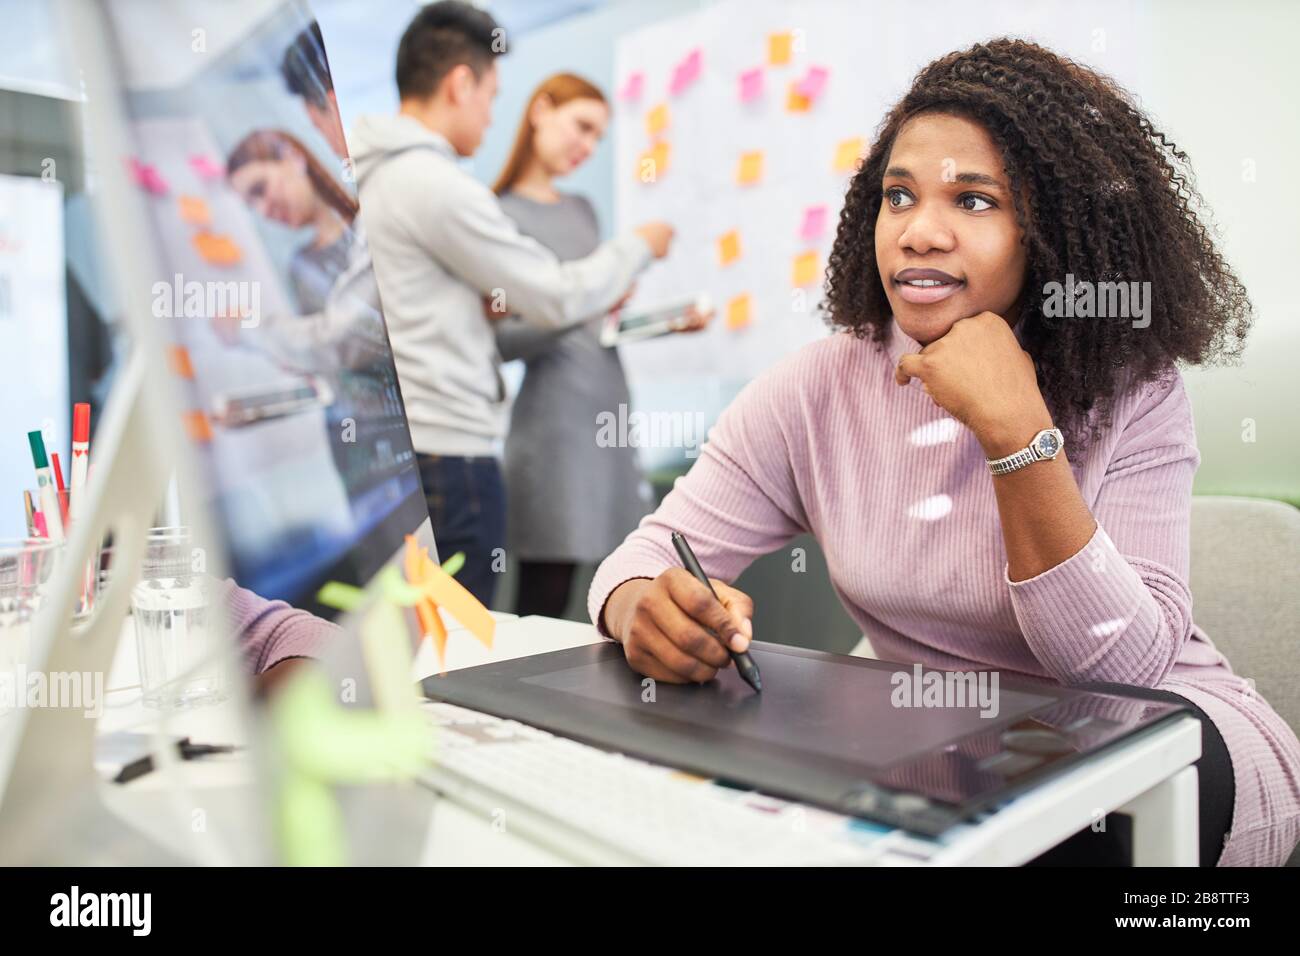 African woman as graphic designer in training on tablet computer Stock Photo